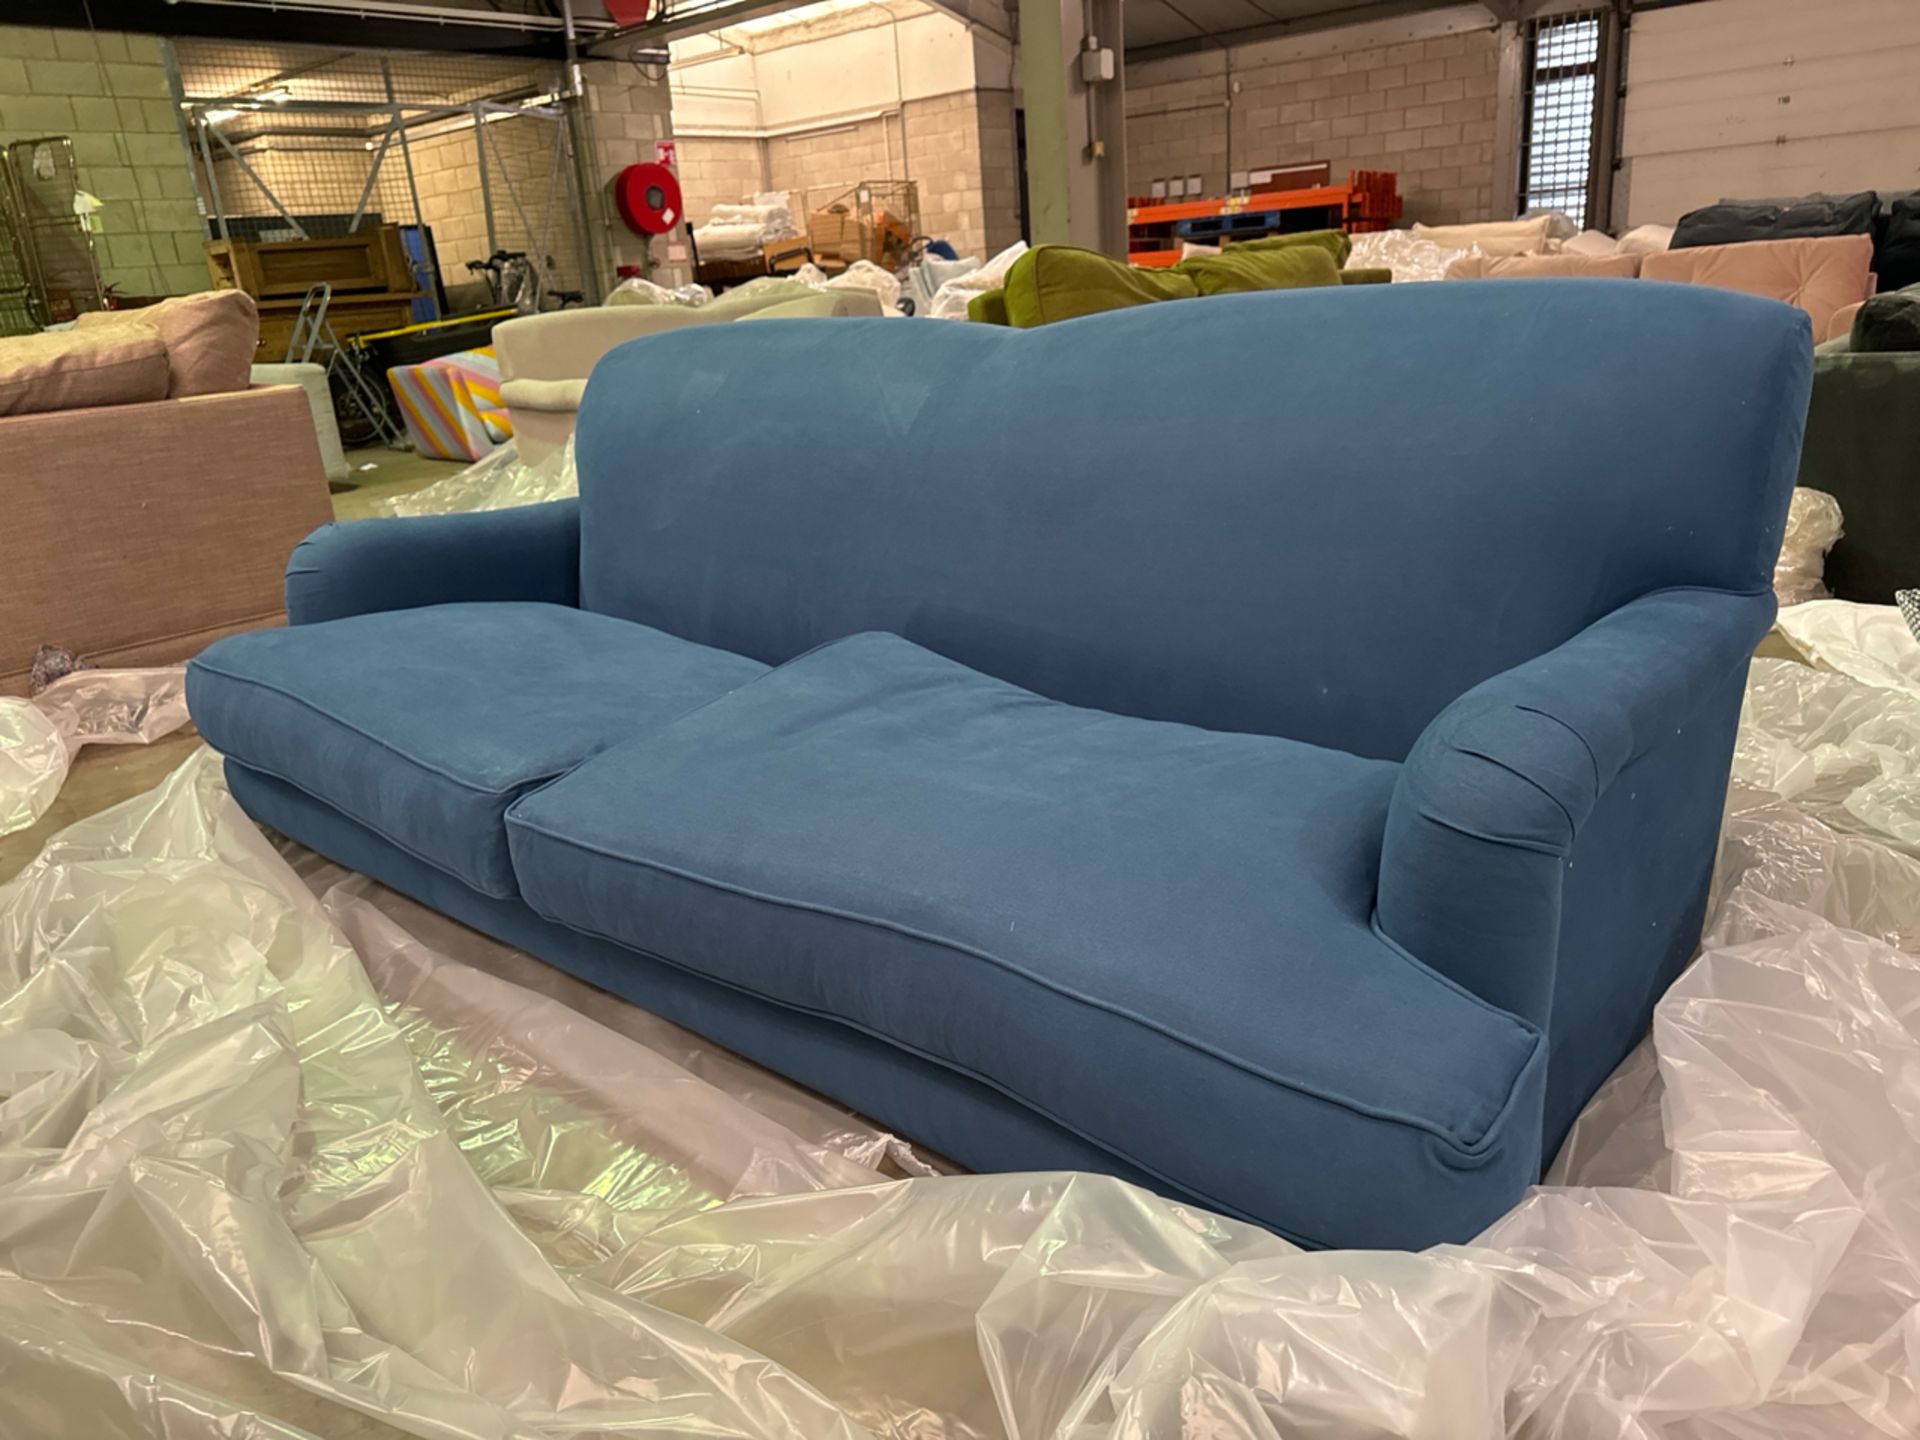 Snowdrop 3 Seat Sofa In Heather Blue Smart Cotton RRP - £2000 - Image 3 of 6